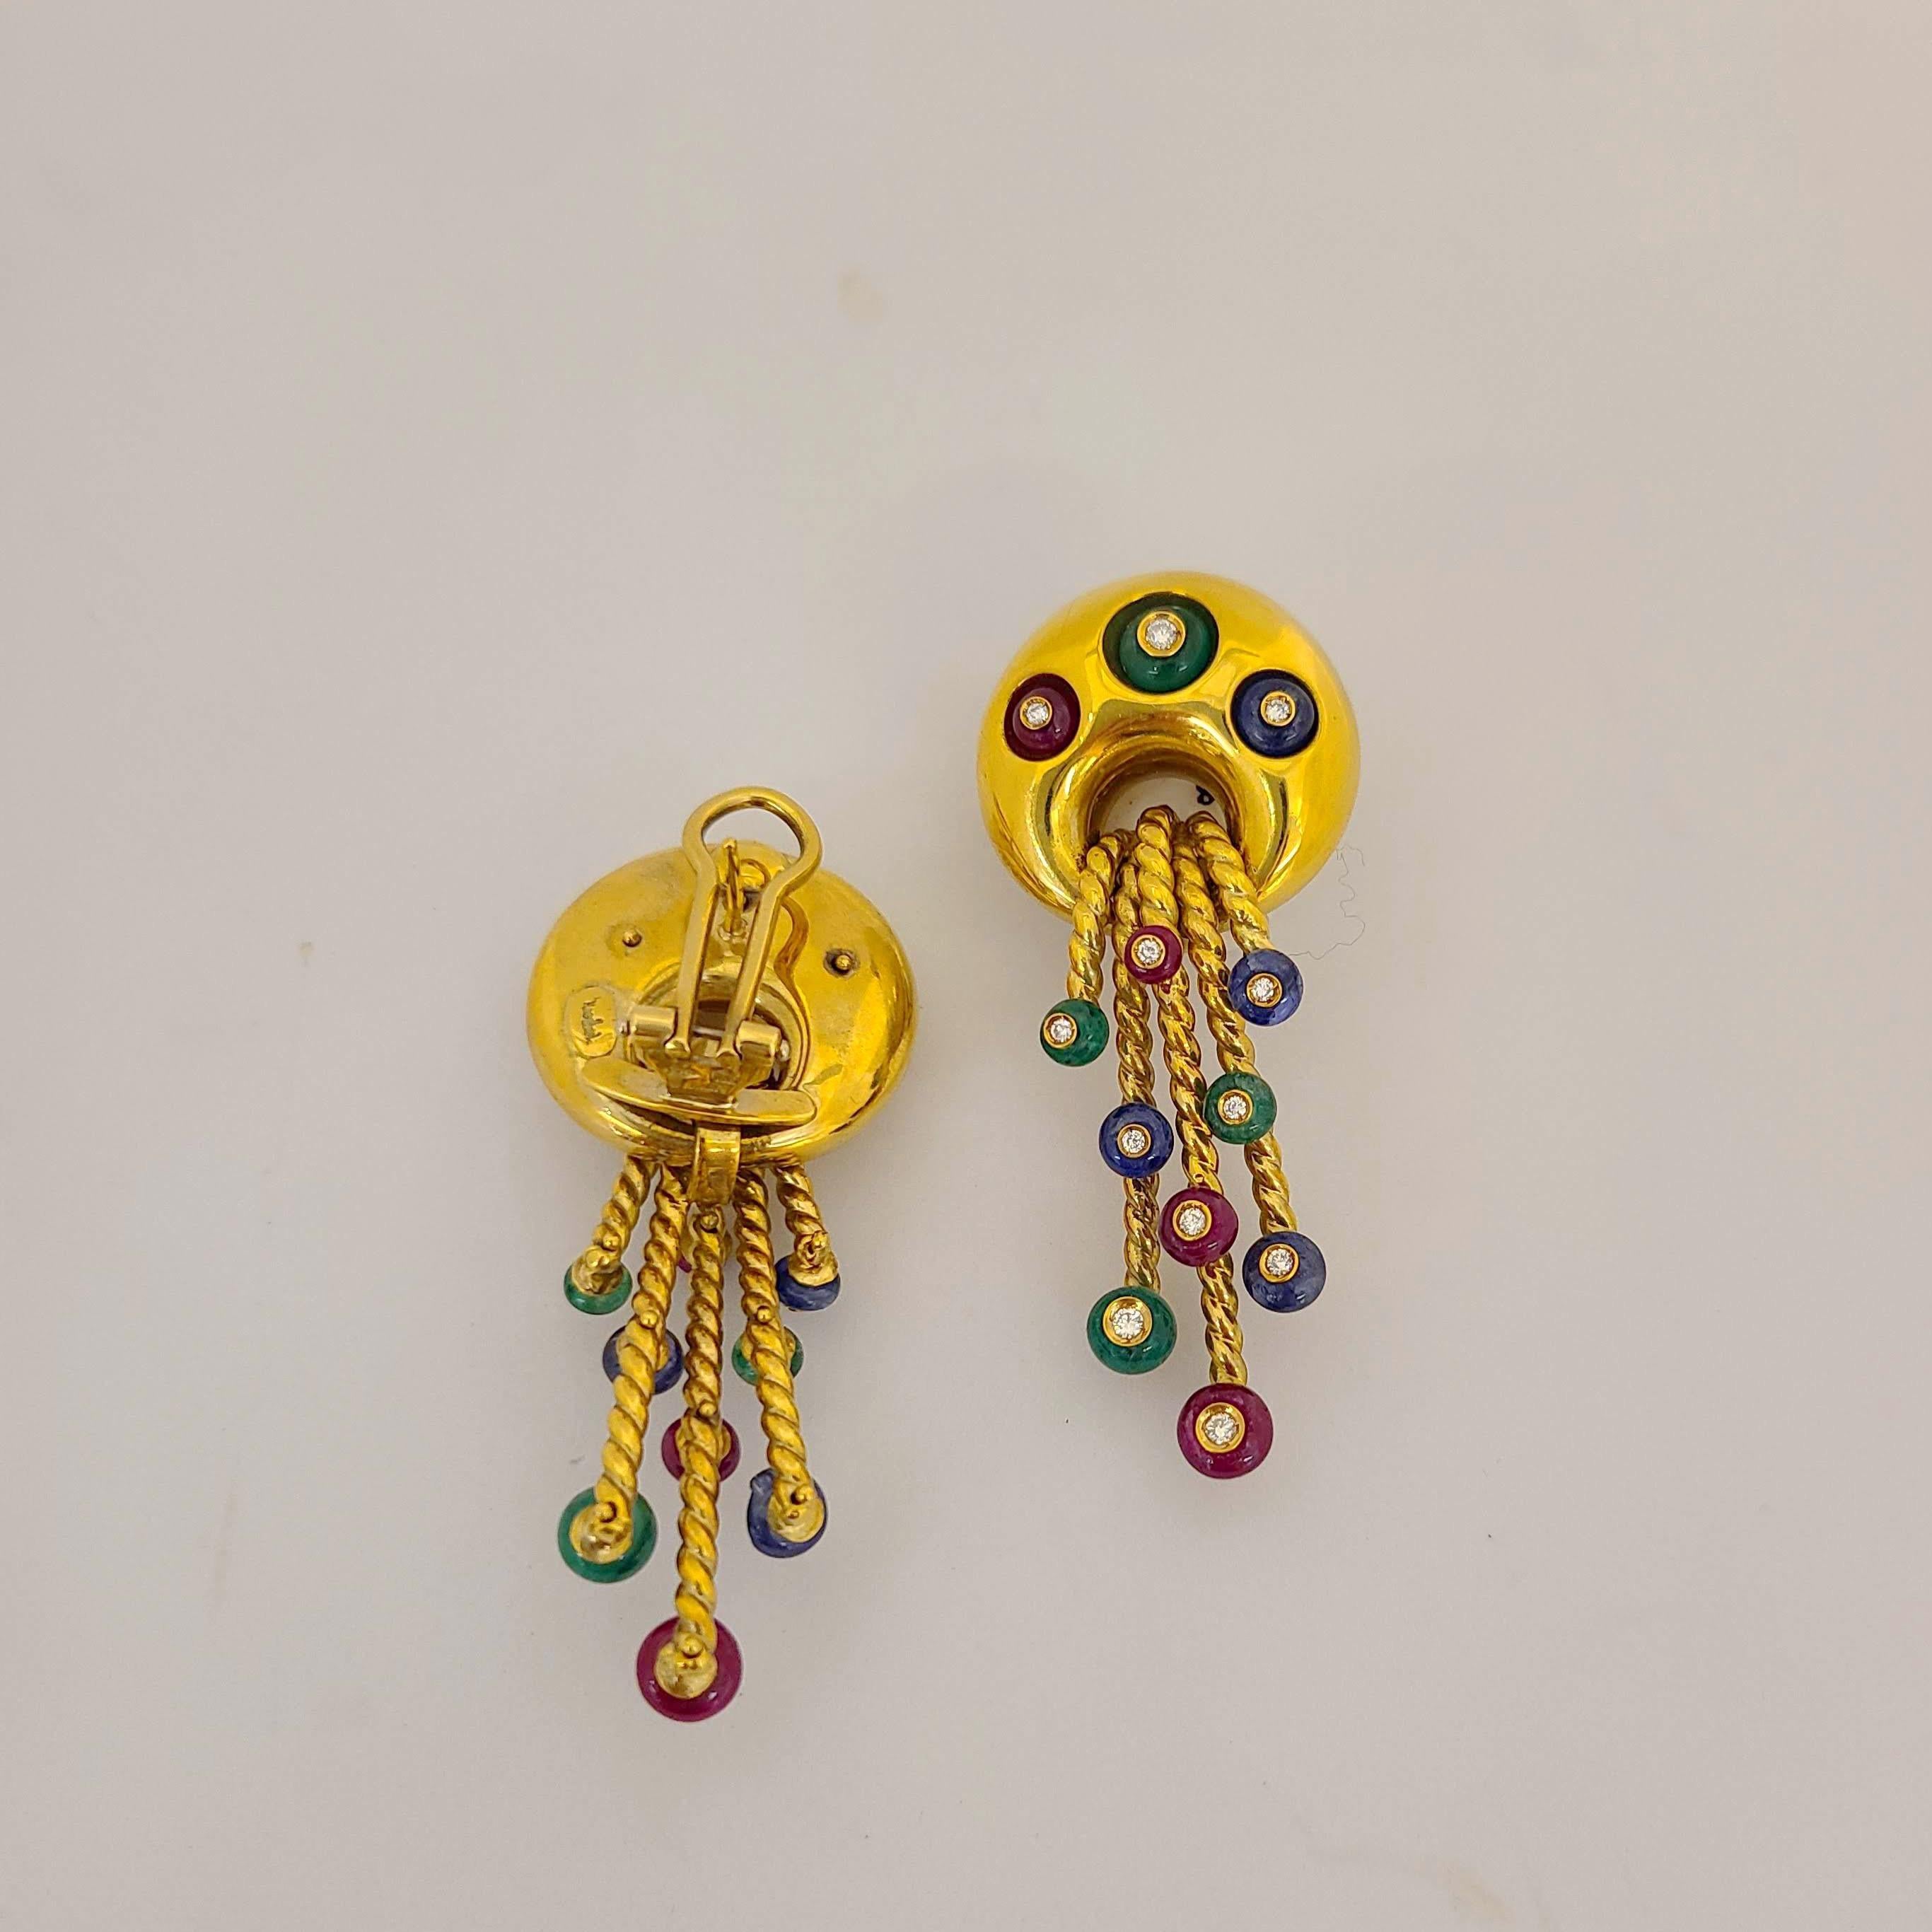 These 18 karat yellow gold earrings were designed by Nino Verita of Italy. A hi polished button earring with 5 stationary gold strands  are accented with emerald, ruby,and sapphire beads. Each bead is set with a round brilliant diamond. The earrings